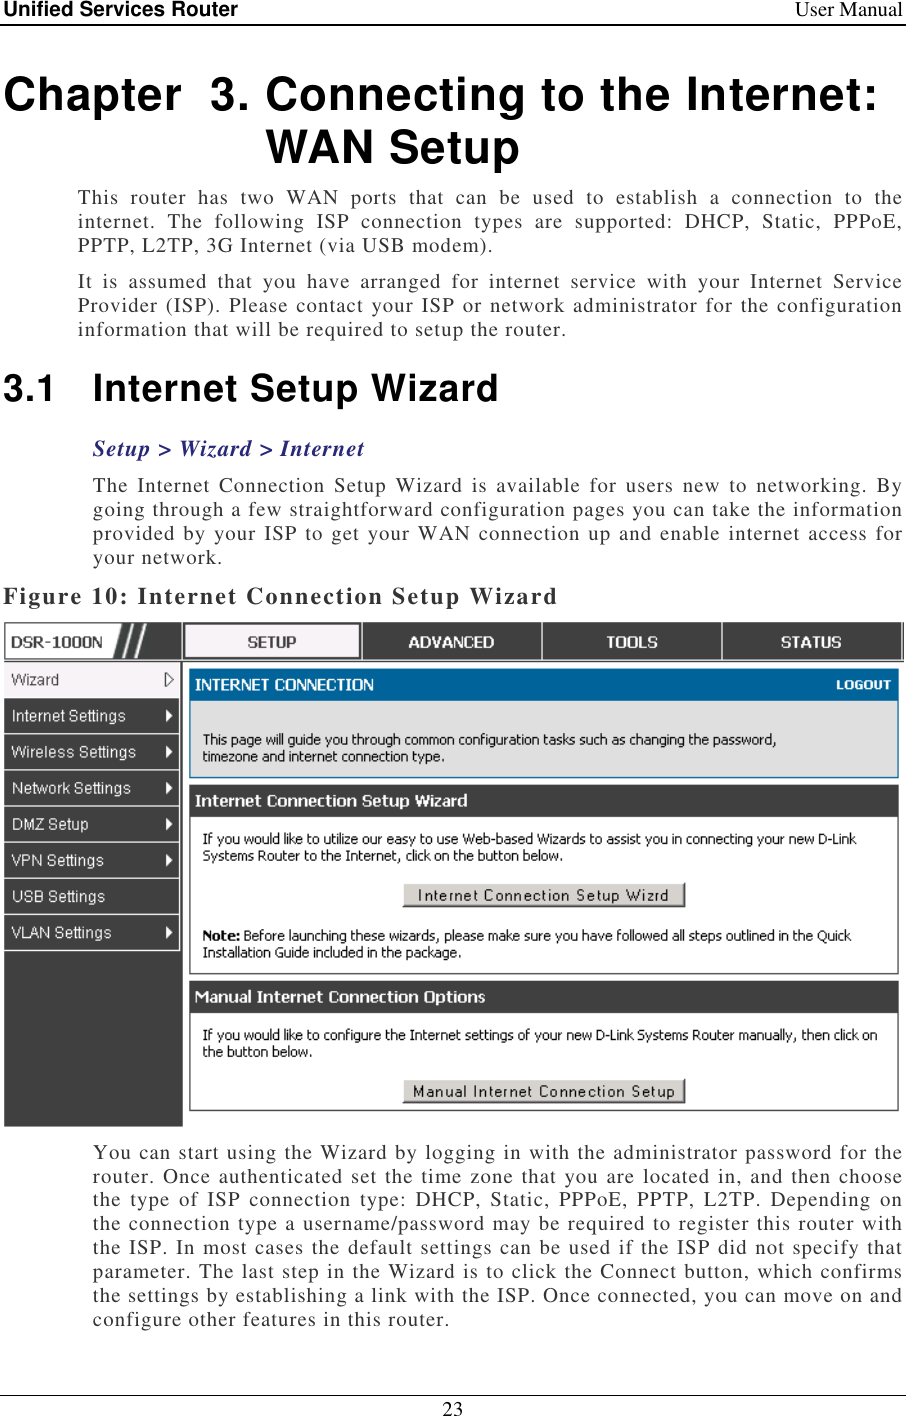 Unified Services Router    User Manual 23  Chapter  3. Connecting to the Internet: WAN Setup This  router  has  two  WAN  ports  that  can  be  used  to  establish  a  connection  to  the internet.  The  following  ISP  connection  types  are  supported:  DHCP,  Static,  PPPoE, PPTP, L2TP, 3G Internet (via USB modem).     It  is  assumed  that  you  have  arranged  for  internet  service  with  your  Internet  Service Provider (ISP). Please contact your ISP or network administrator for the configuration information that will be required to setup the router. 3.1  Internet Setup Wizard Setup &gt; Wizard &gt; Internet The  Internet  Connection  Setup  Wizard  is  available  for  users  new  to  networking.  By going through a few straightforward configuration pages you can take the information provided by your ISP to get  your WAN connection up and enable internet access for your network.  Figure 10: Internet Connection Setup Wizard  You can start using the Wizard by logging in with the administrator password for the router. Once authenticated set the time zone that you are located in, and then choose the  type  of  ISP  connection  type:  DHCP,  Static,  PPPoE,  PPTP,  L2TP.  Depending  on the connection type a username/password may be required to register this router with the ISP. In most cases the default settings can be used if the ISP did not specify that parameter. The last step in the Wizard is to click the Connect button, which confirms the settings by establishing a link with the ISP. Once connected, you can move on and configure other features in this router. 